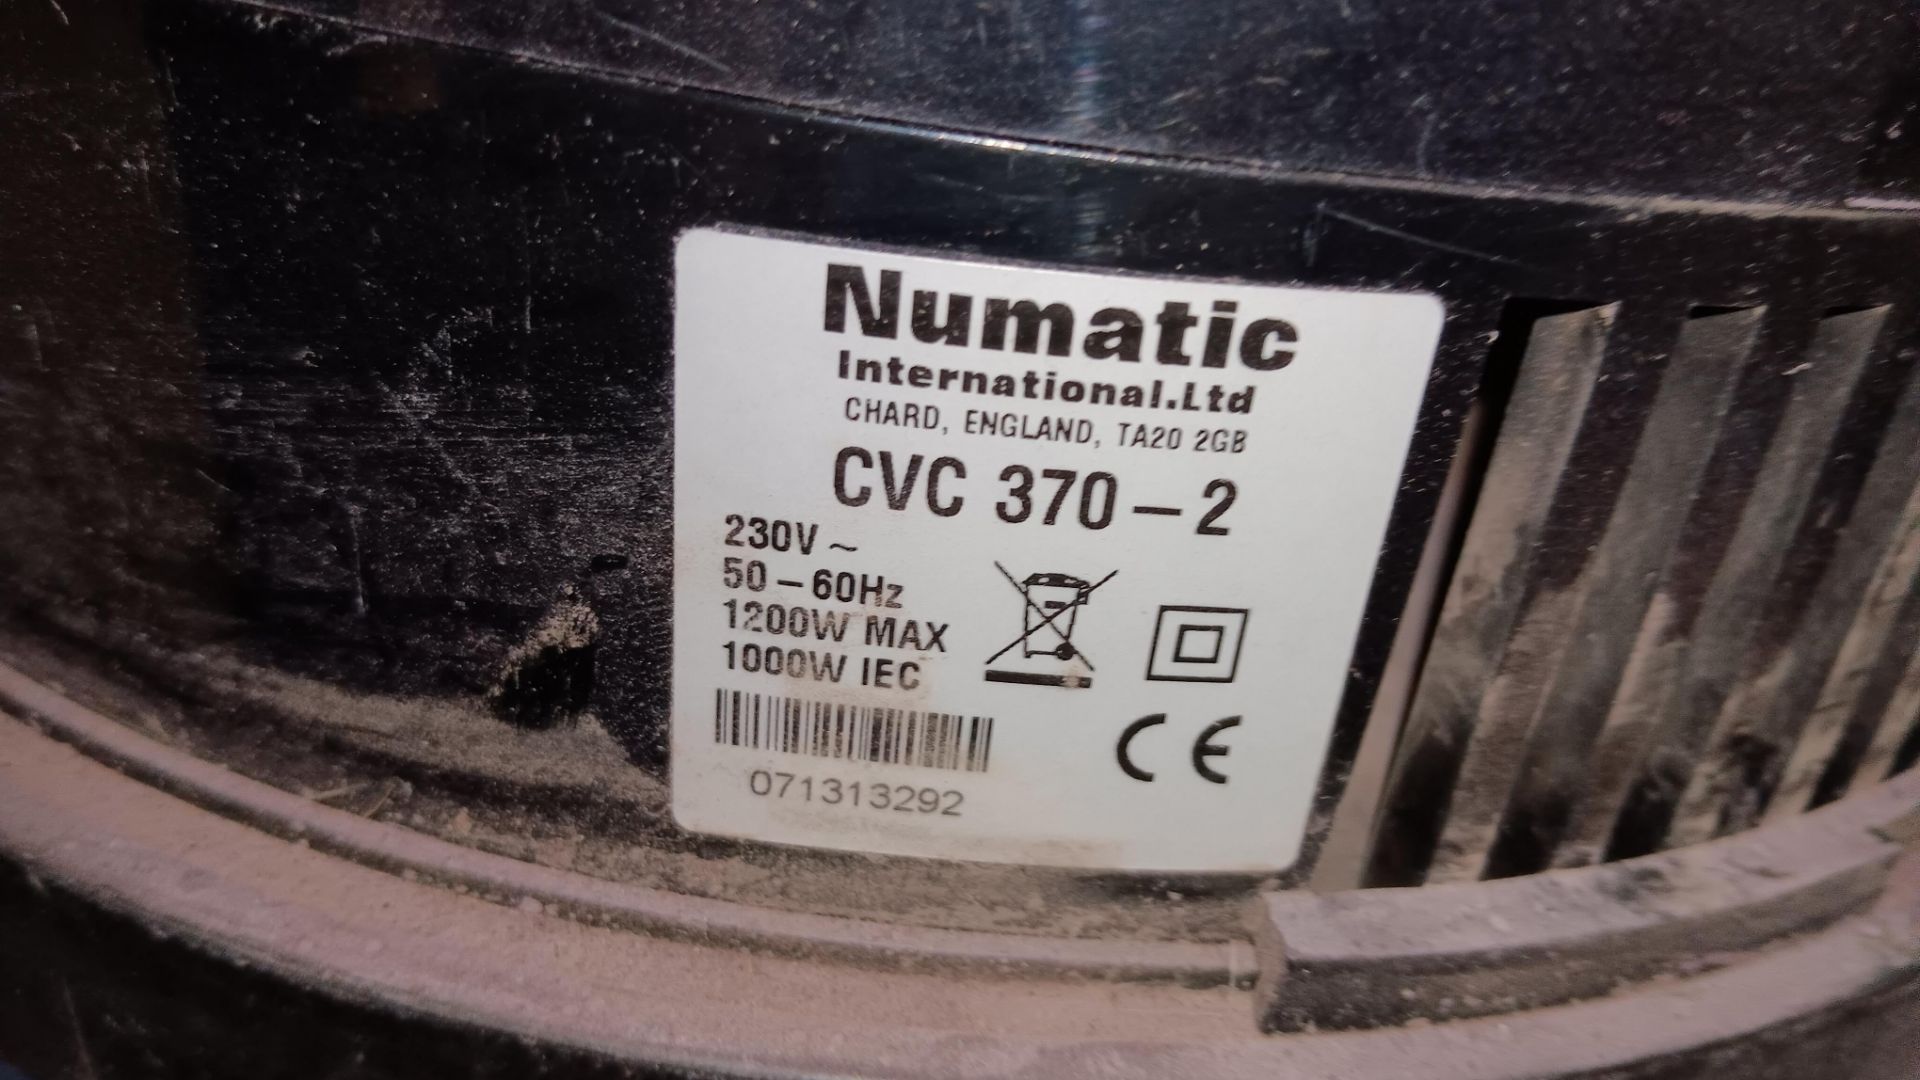 Numatic CVC 370-2 wet and dry vacuum, 240v, serial number 071313292 – Located in Unit 1 - Image 2 of 2